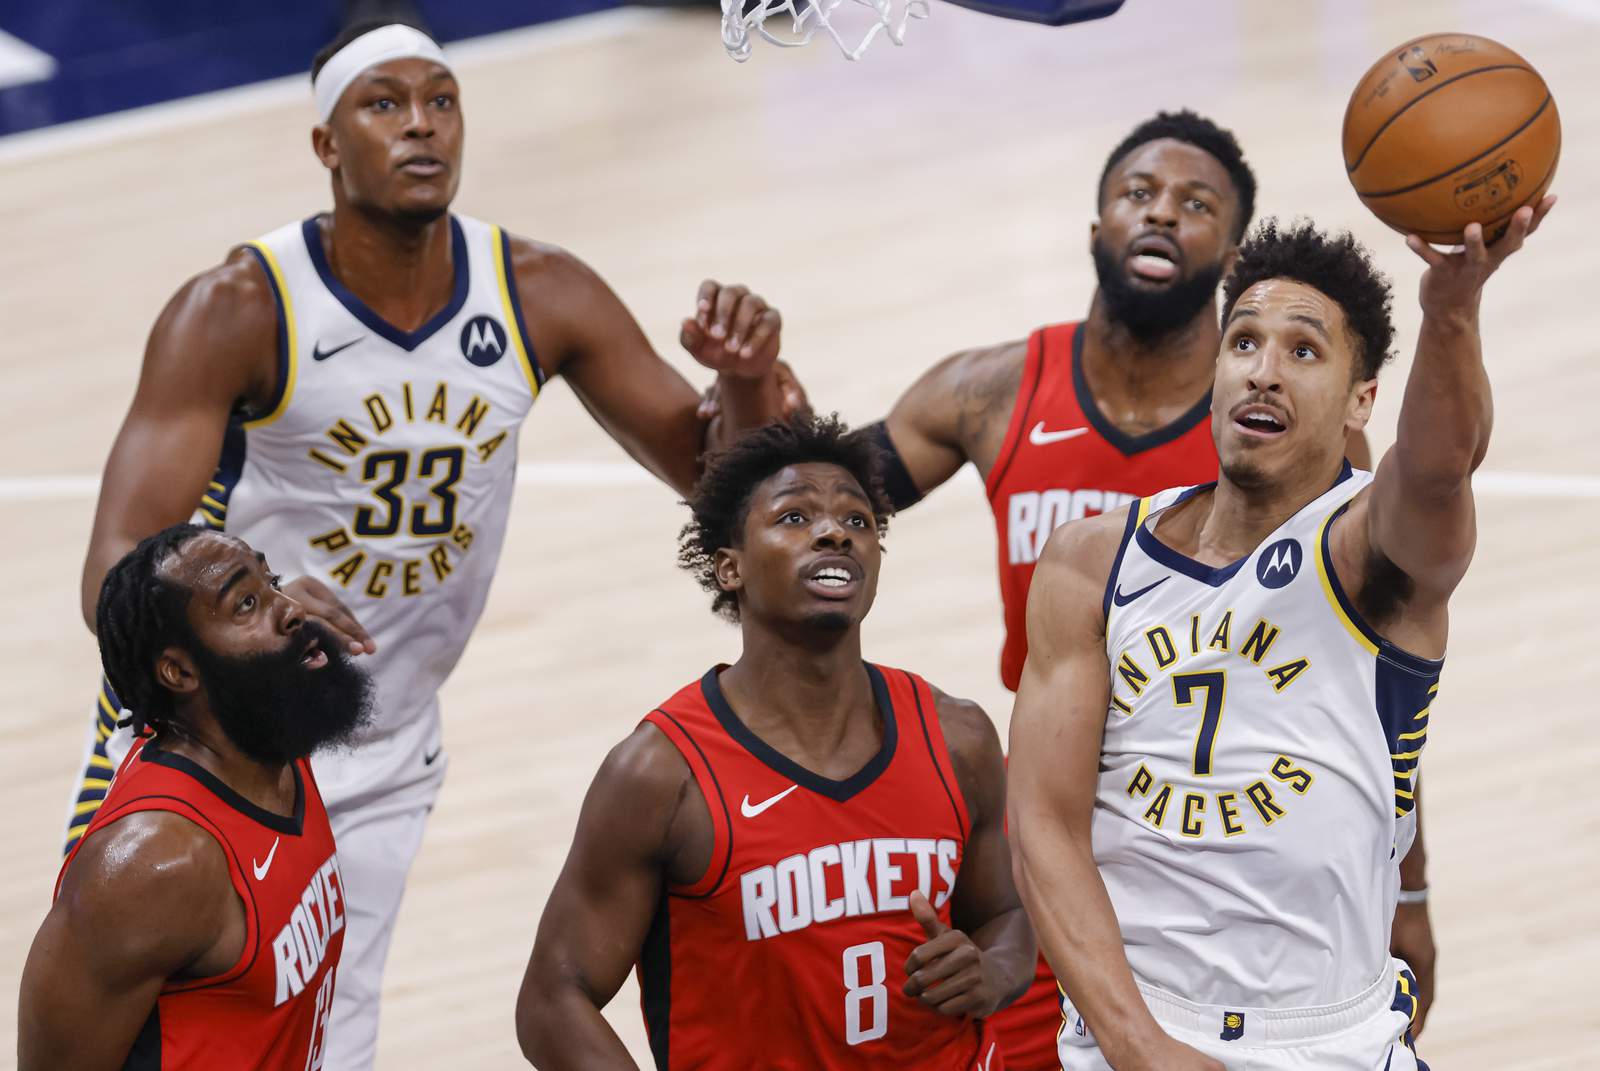 Brogdon’s late 3 helps Pacers shake off Rockets, 114-107